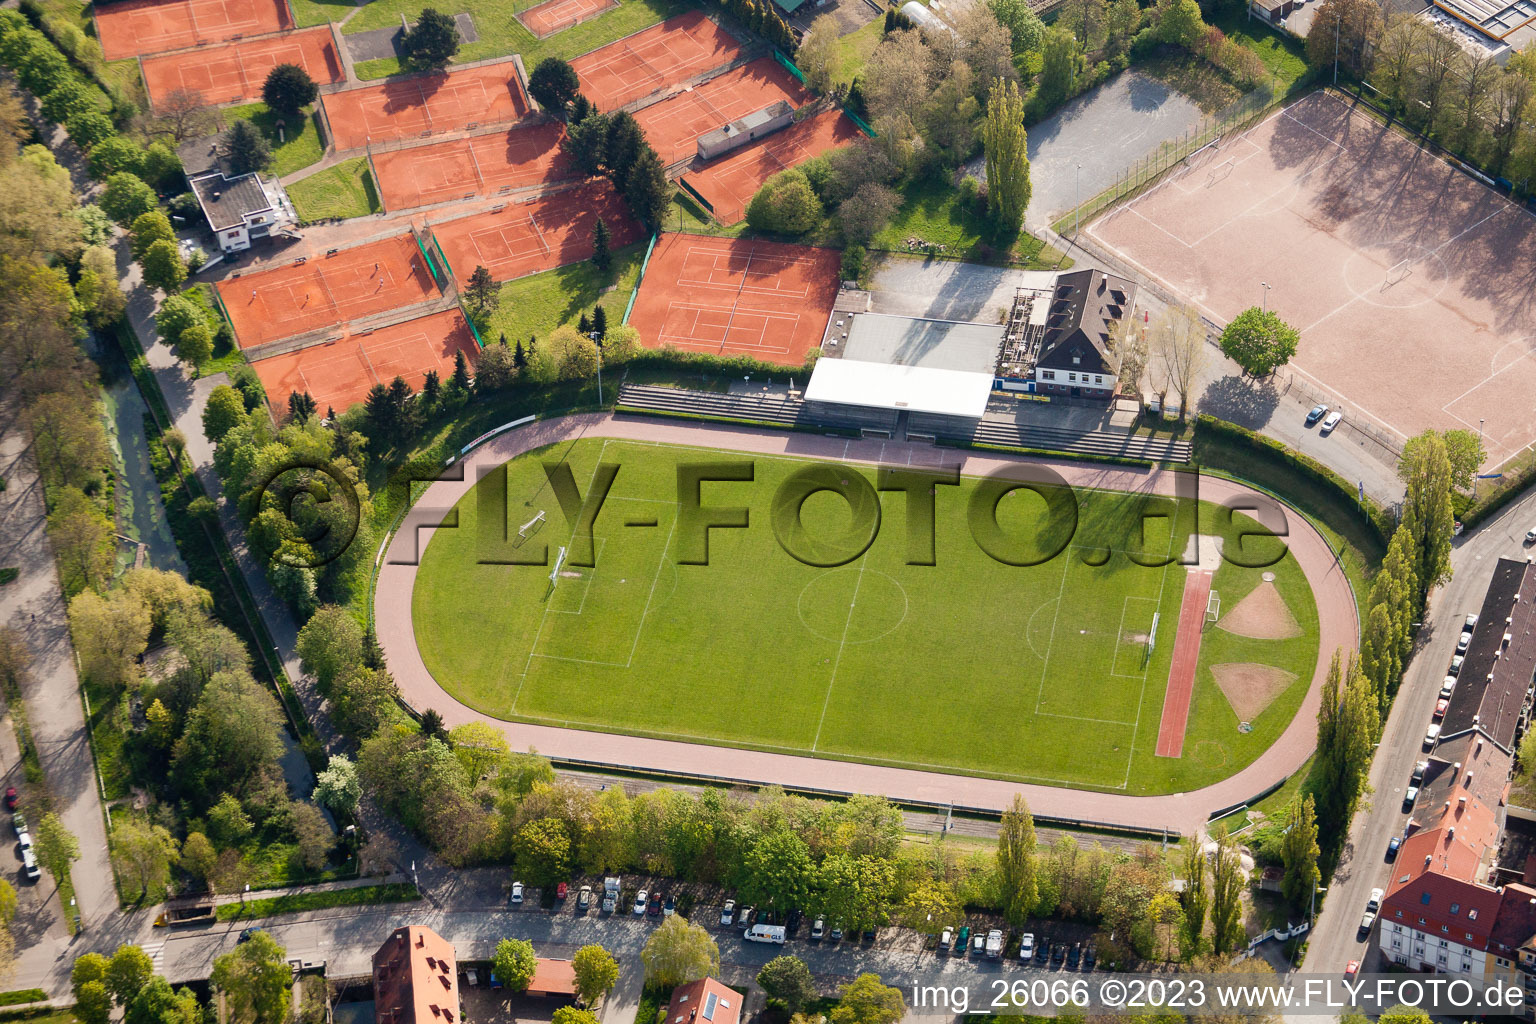 Aerial view of Turmberg Stadium in the district Durlach in Karlsruhe in the state Baden-Wuerttemberg, Germany